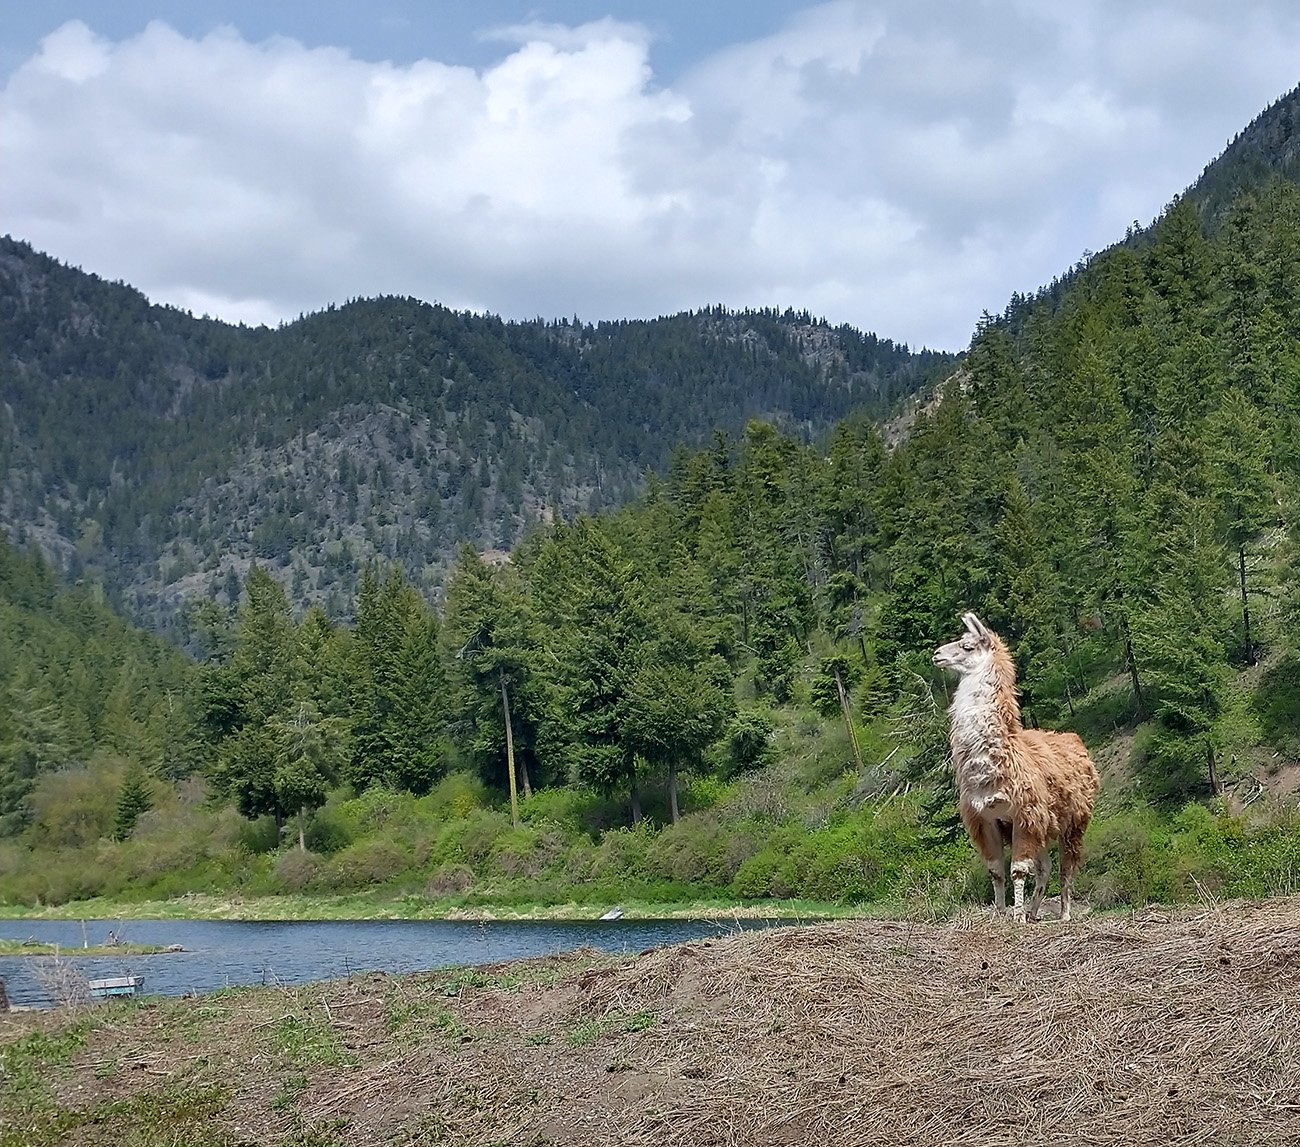 Then this majestic Guard Llama crested the hill and started giving me the stink eye as I took pictures of baby goats. 